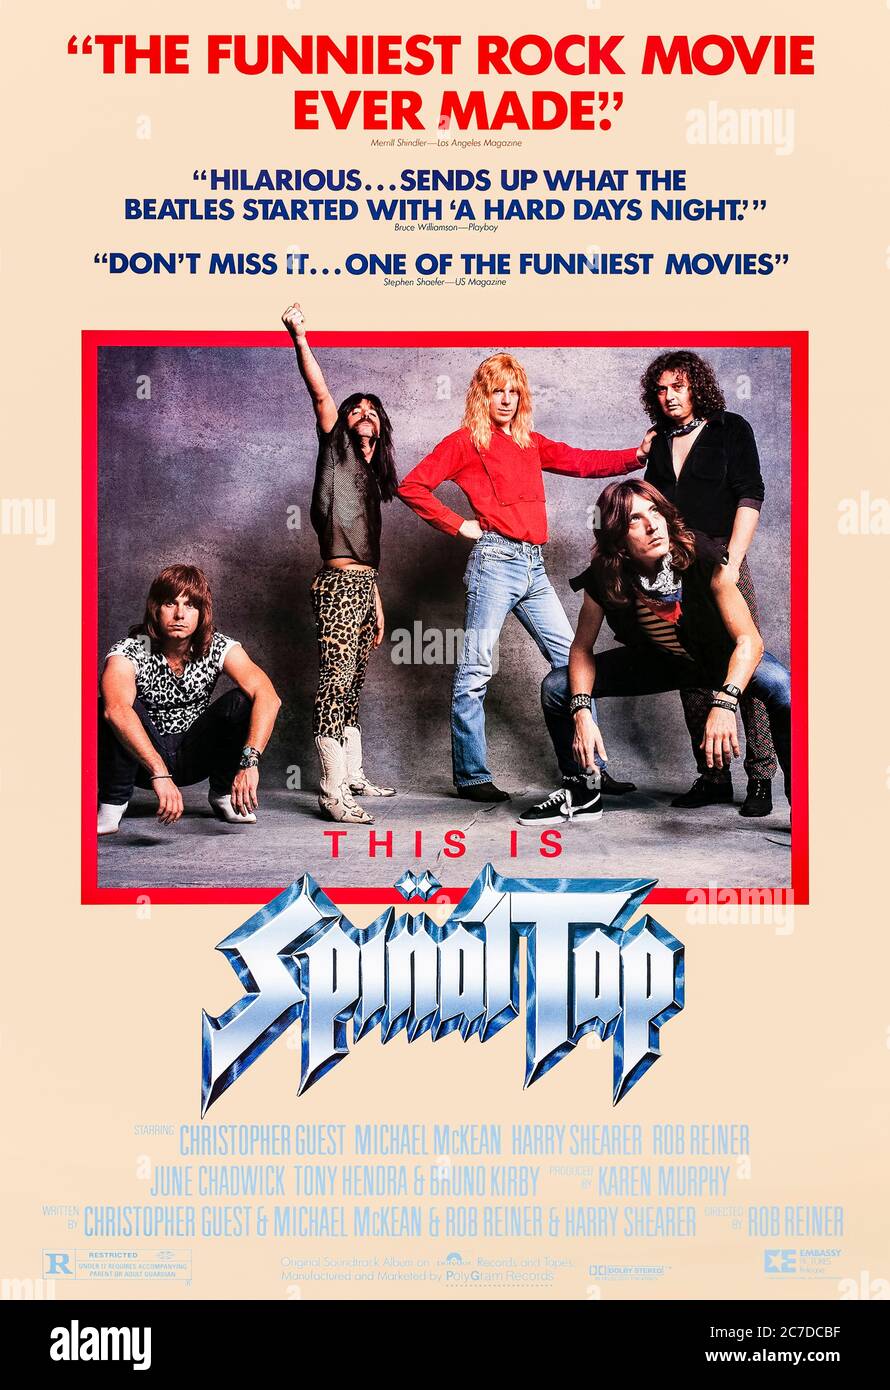 This Is Spinal Tap (1984) directed by Rob Reiner and starring Rob Reiner, Michael McKean, Christopher Guest and Harry Shearer. Marty DiBergi's cult documentary about the legendary English heavy metal band Spinal Tap during their American tour. Stock Photo